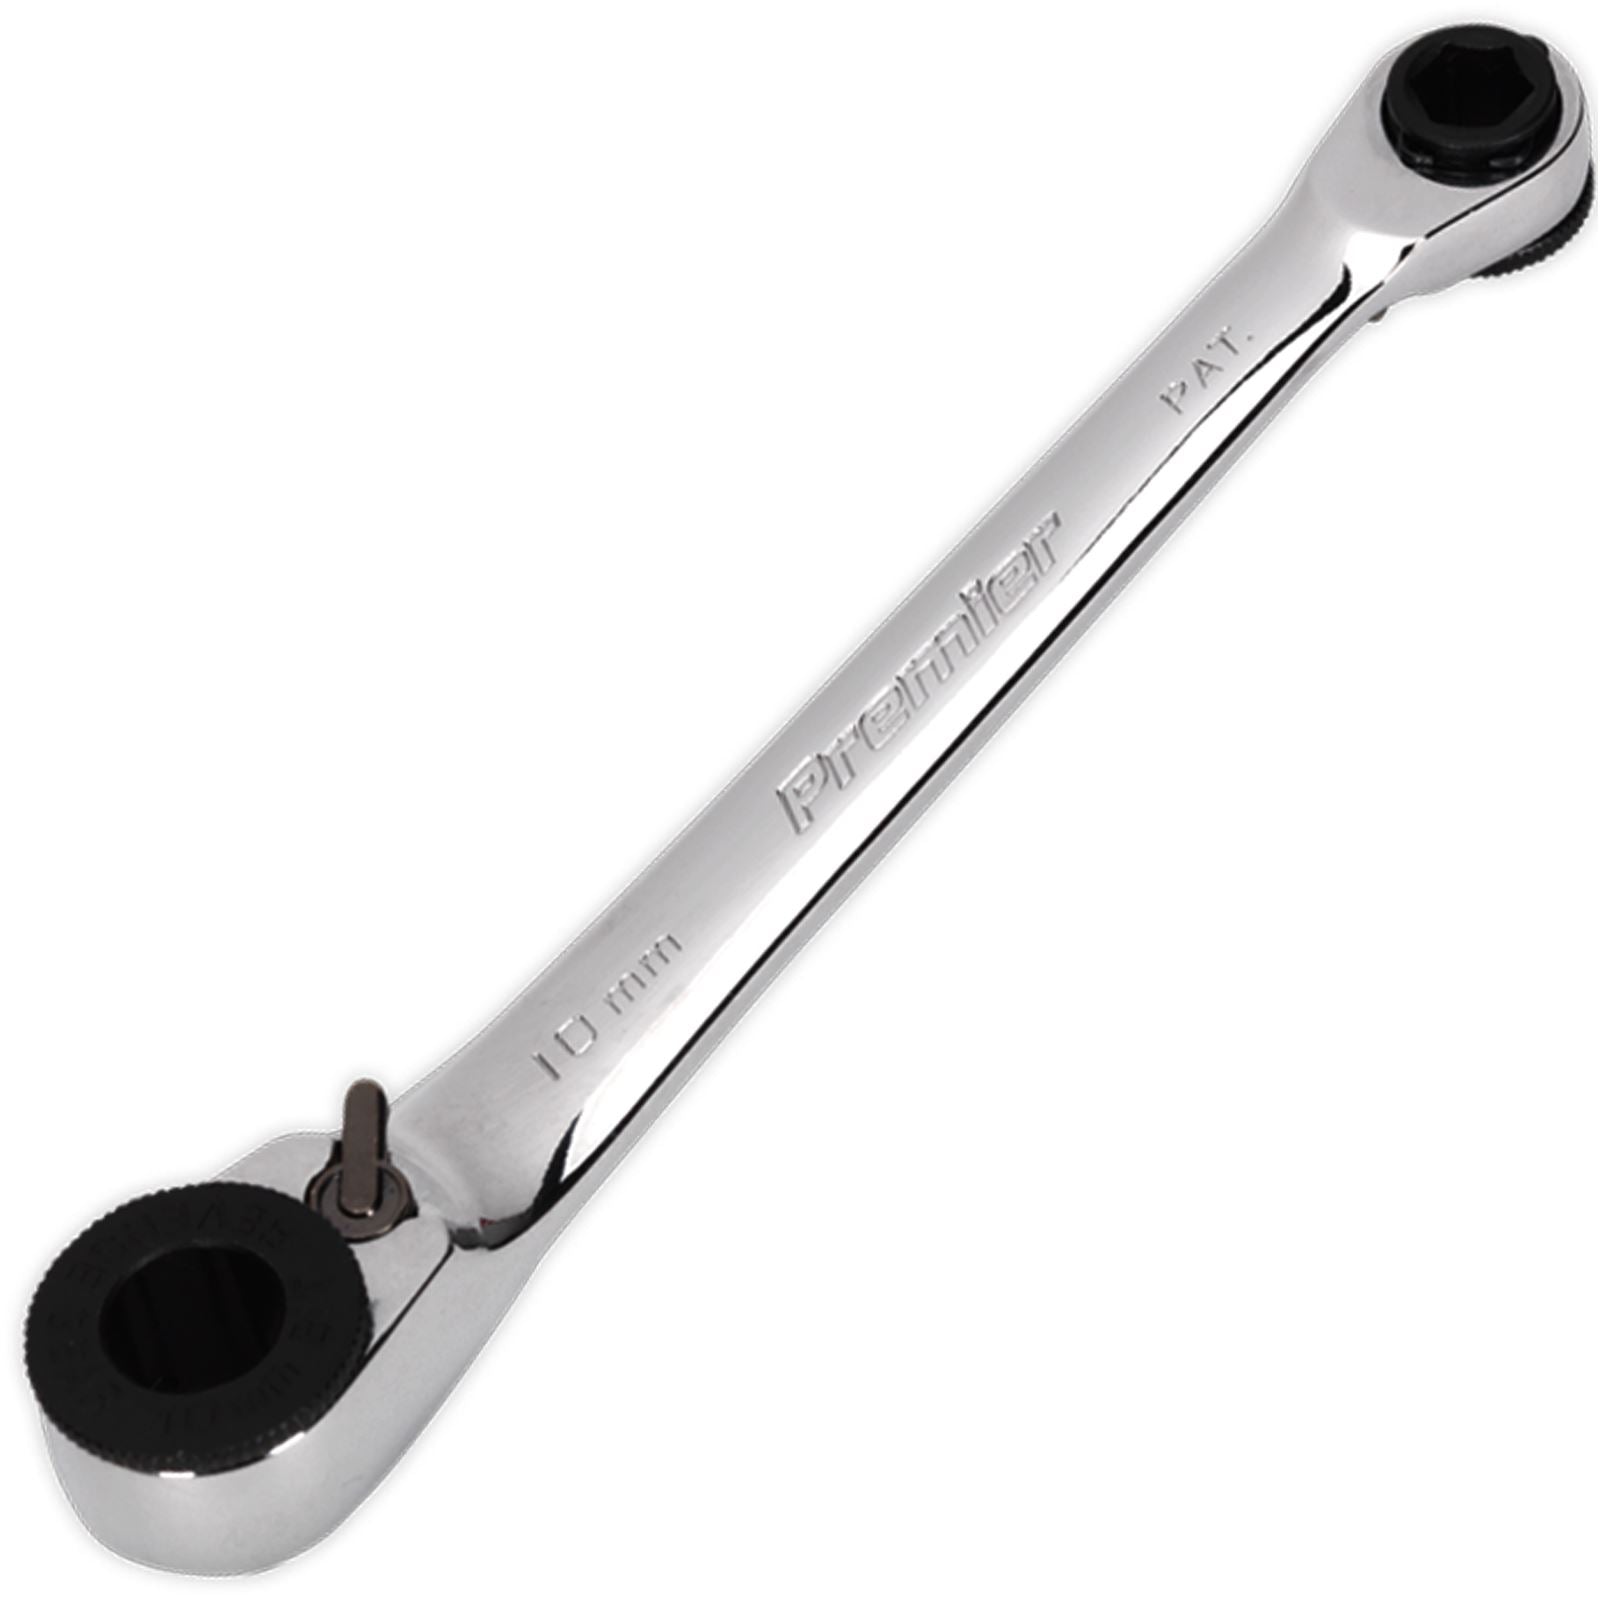 Sealey 1/4" Hex x 10mm Hex Reversible Ratchet Spanner 72 Tooth